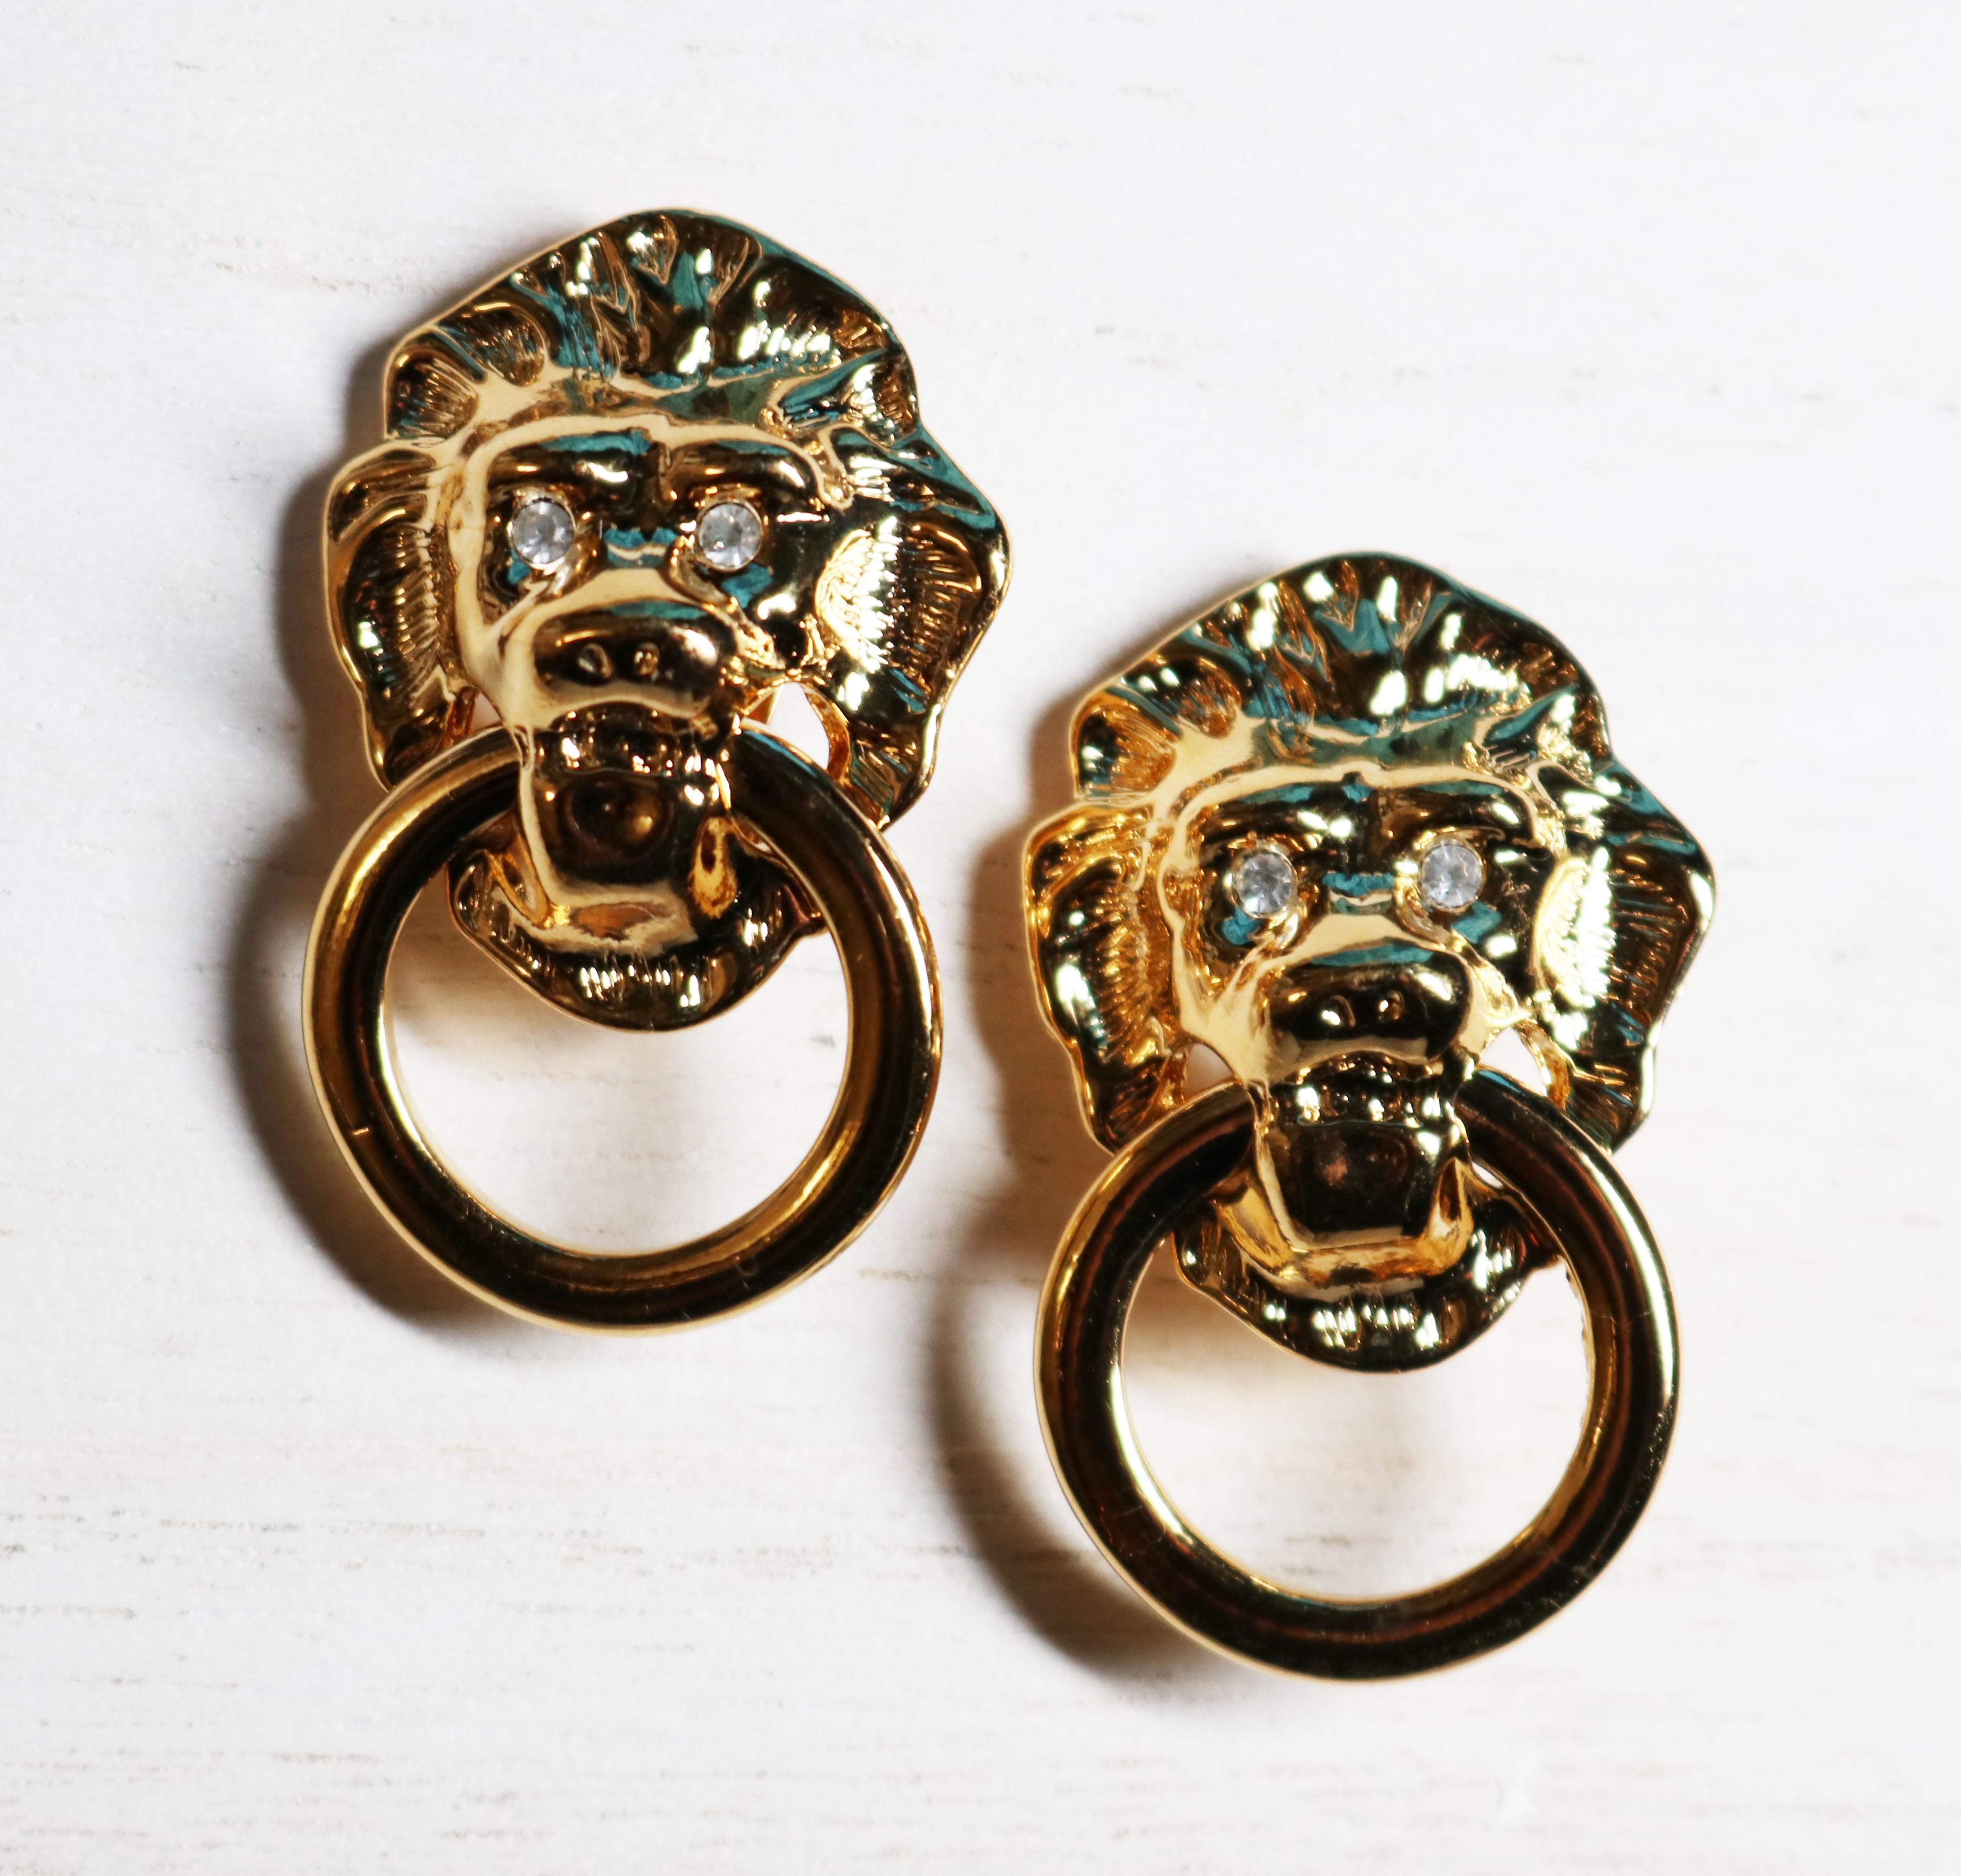 These vintage 1986, gorgeous, collectible, Kenneth Jay Lane, Lion's Head, Doorknocker earrings are designed by the 'jeweler to the world's most admired women' for the AVON Society and these iconic pieces are a lustrous gold tone with rhinestone